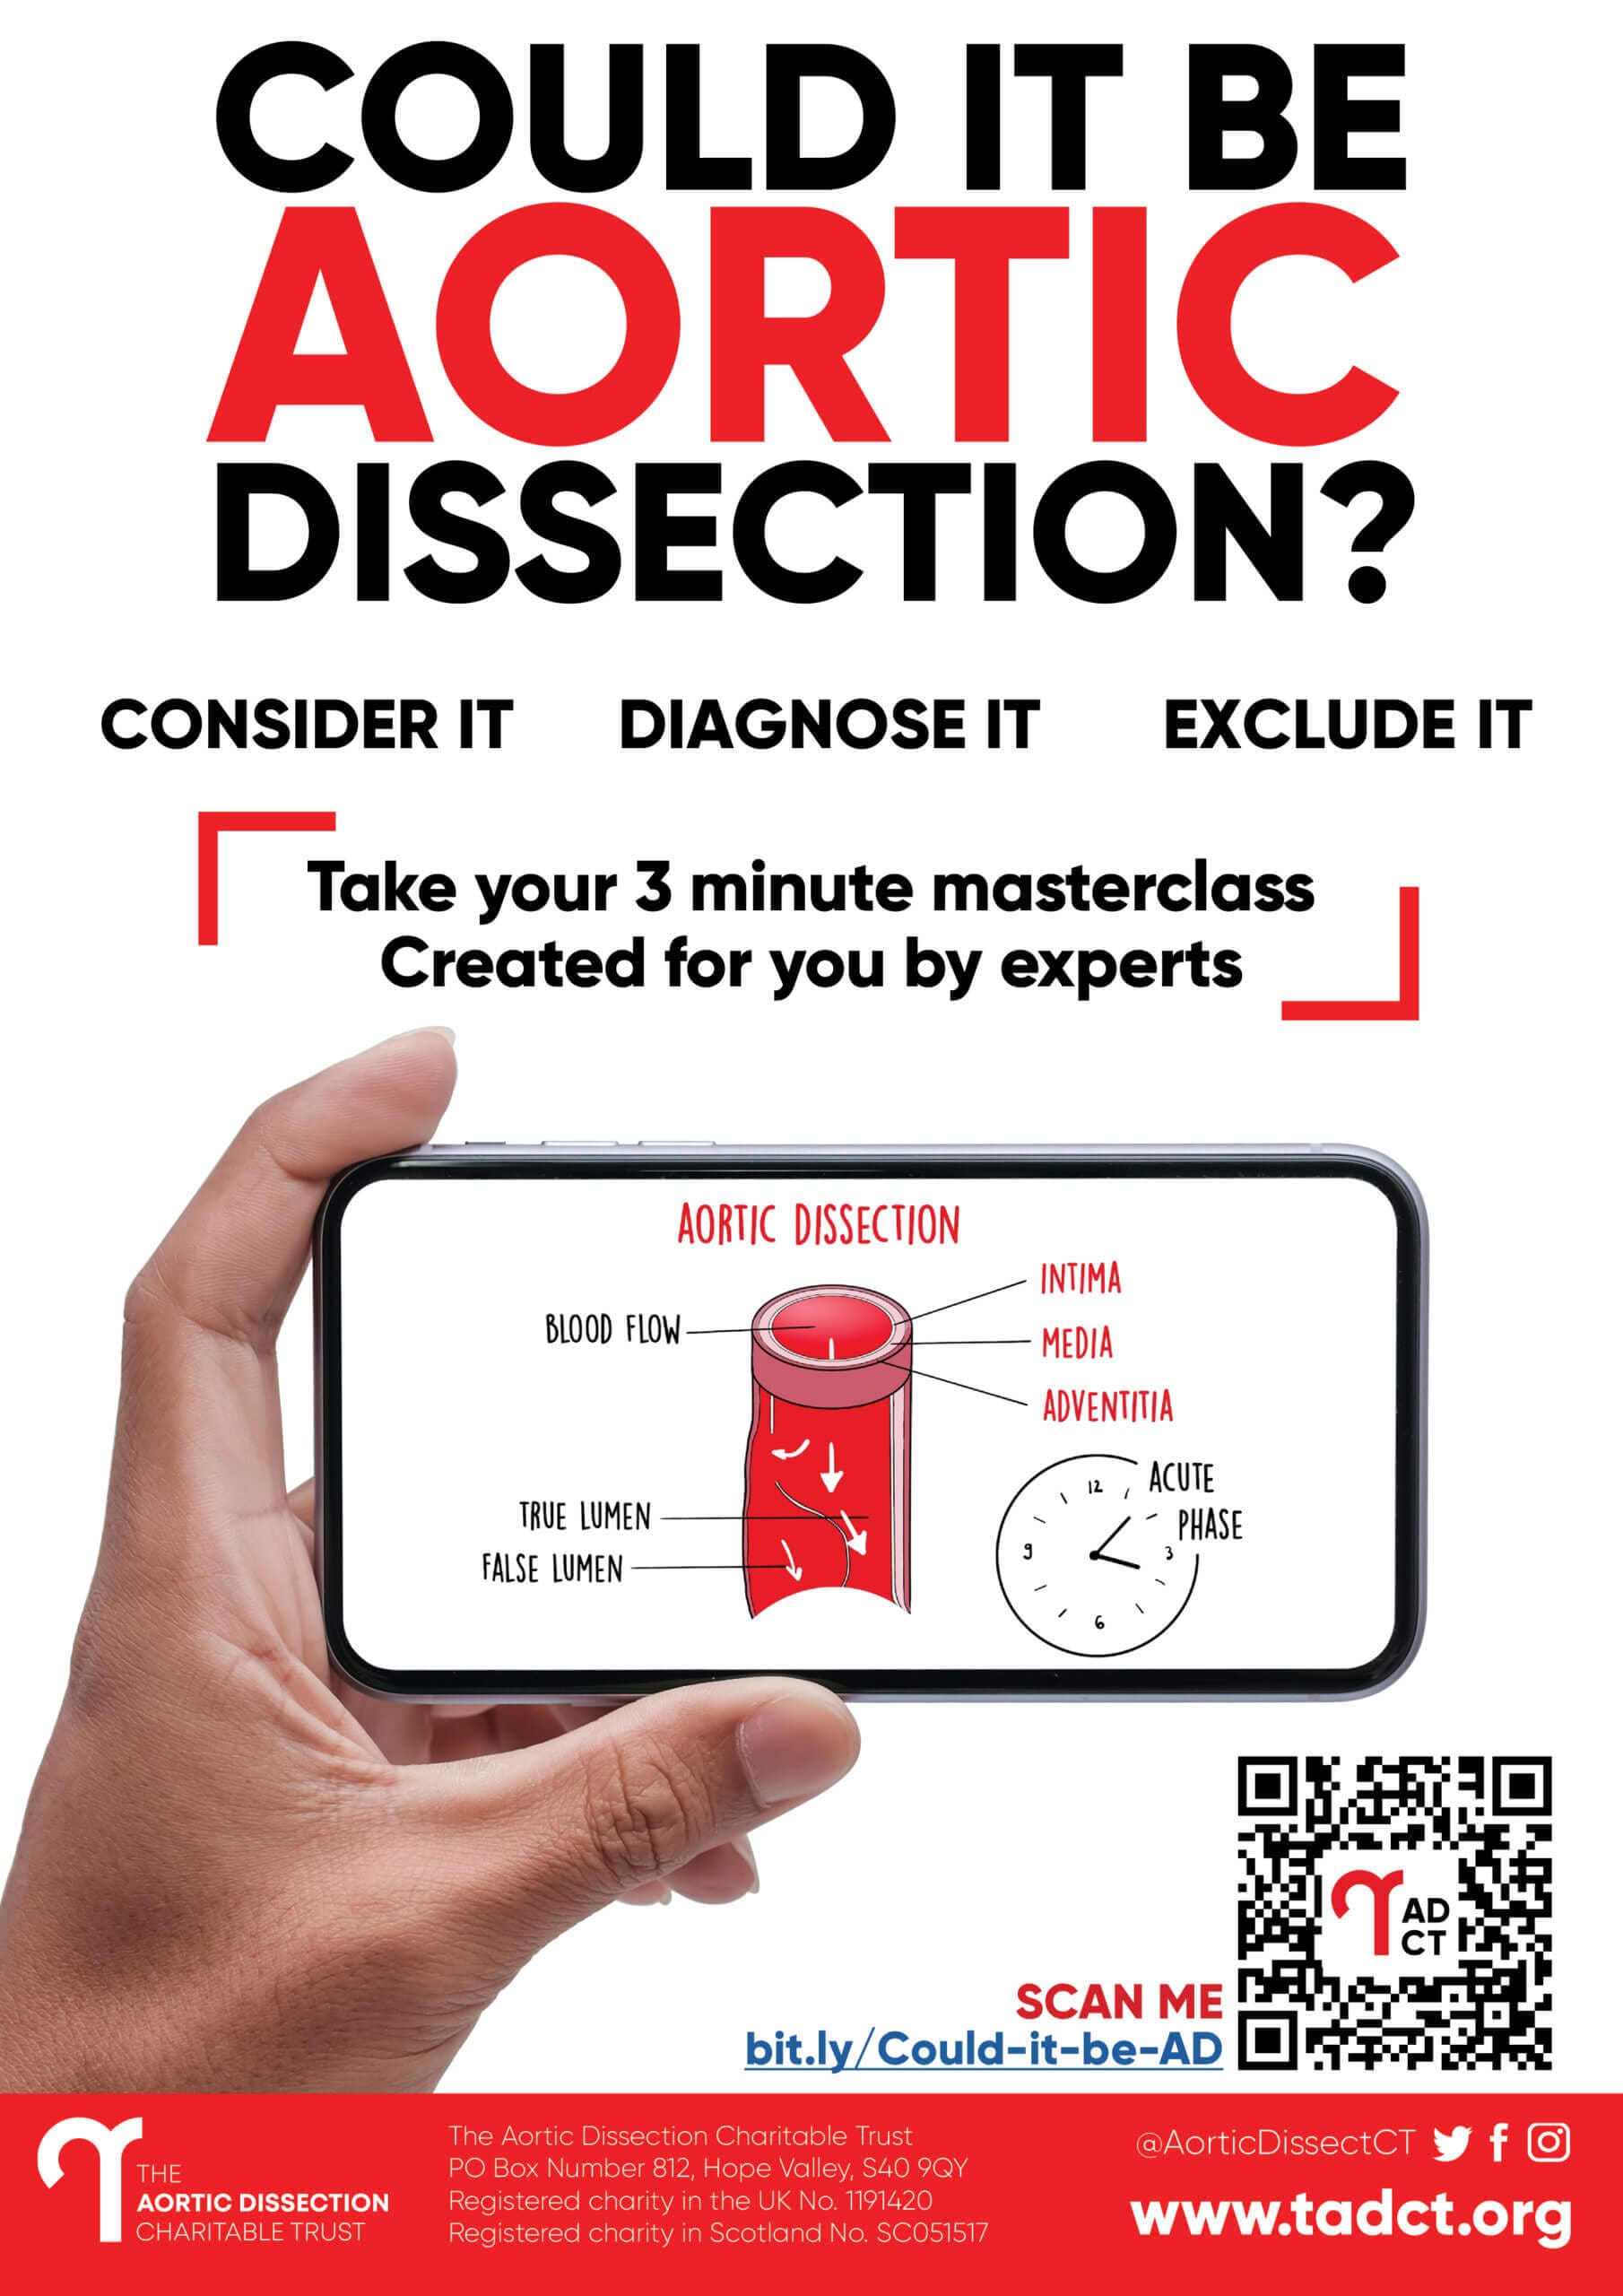 Could it be aortic dissection poster